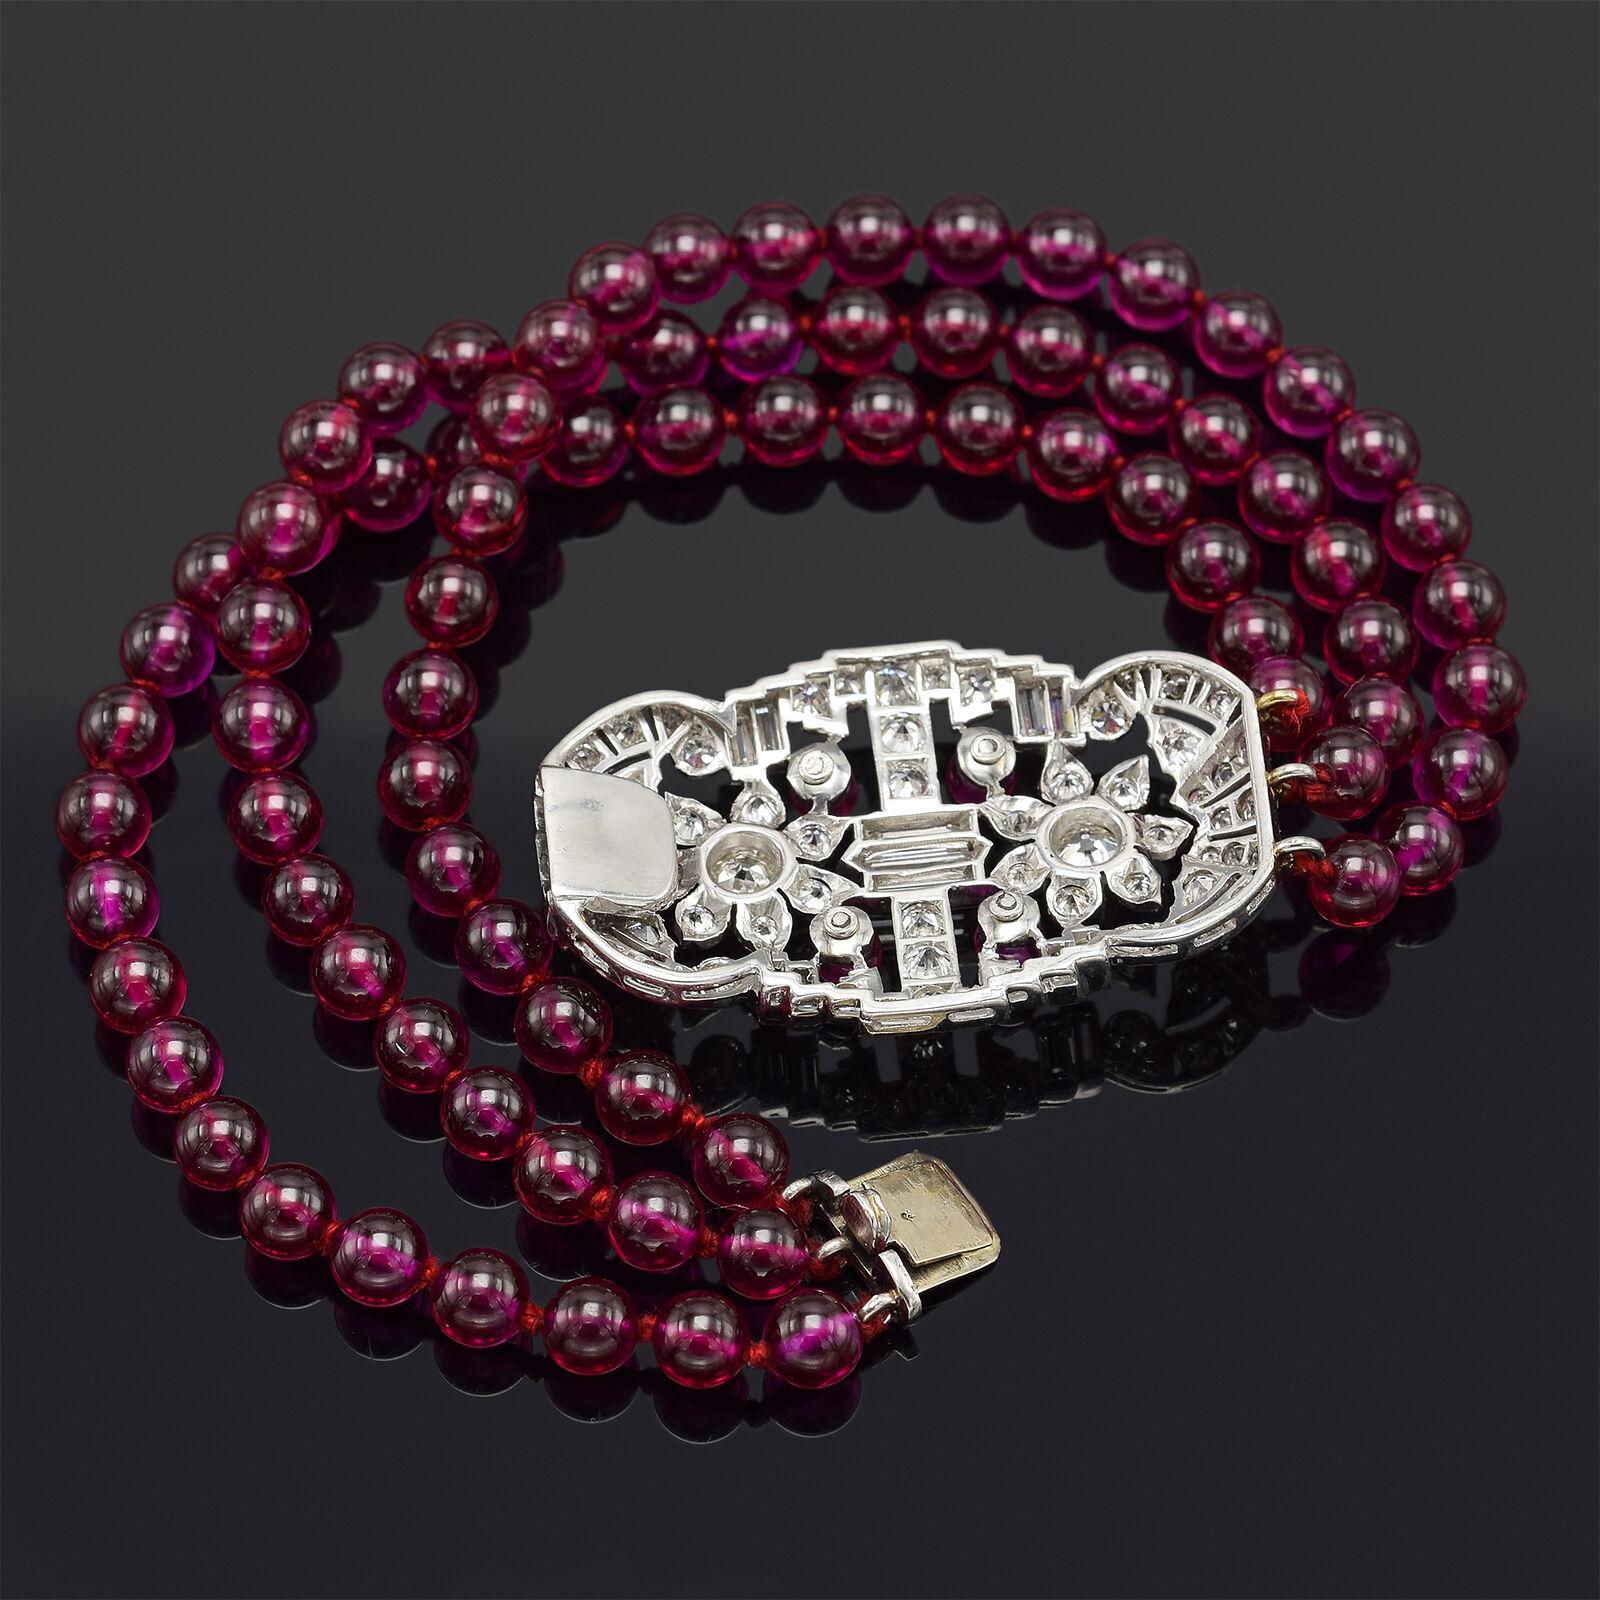 Weight: 32.6 Grams
Stone: Ruby (3.5-5.2 mm) & Approx 3.85 TCW (0.01-0.18 ct) H/I VS Old Euro & Baguette Diamonds
Clasp Measurements: 38.5 x 23.4 mm
Bracelet Size: 7 Inches
Hallmark: Platinum Tested

ITEM #: BR-519-082021-05